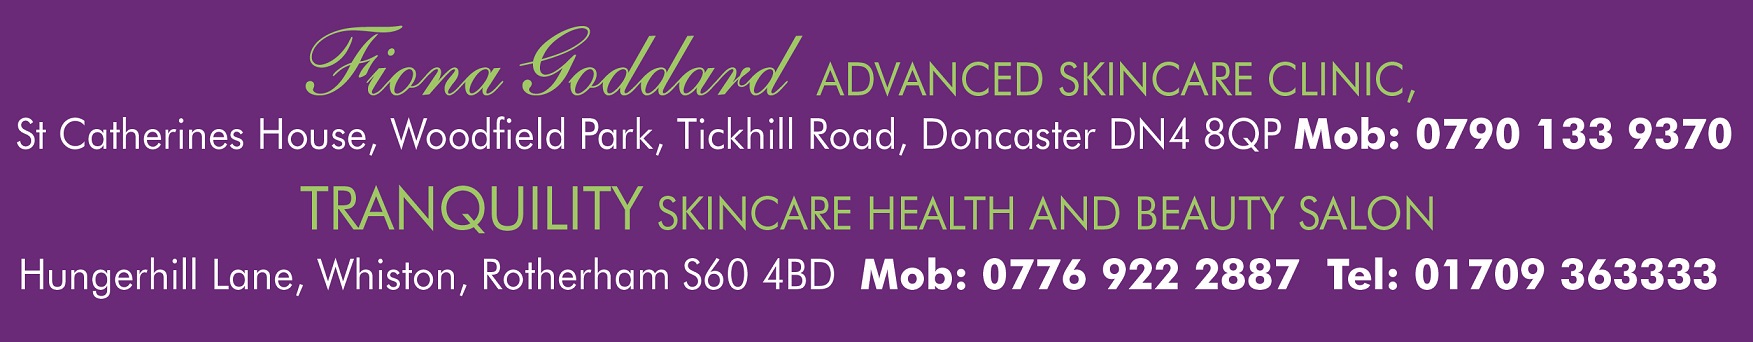 Fiona Goddard Advanced Skin Care Clinics – Doncaster and Rotherham